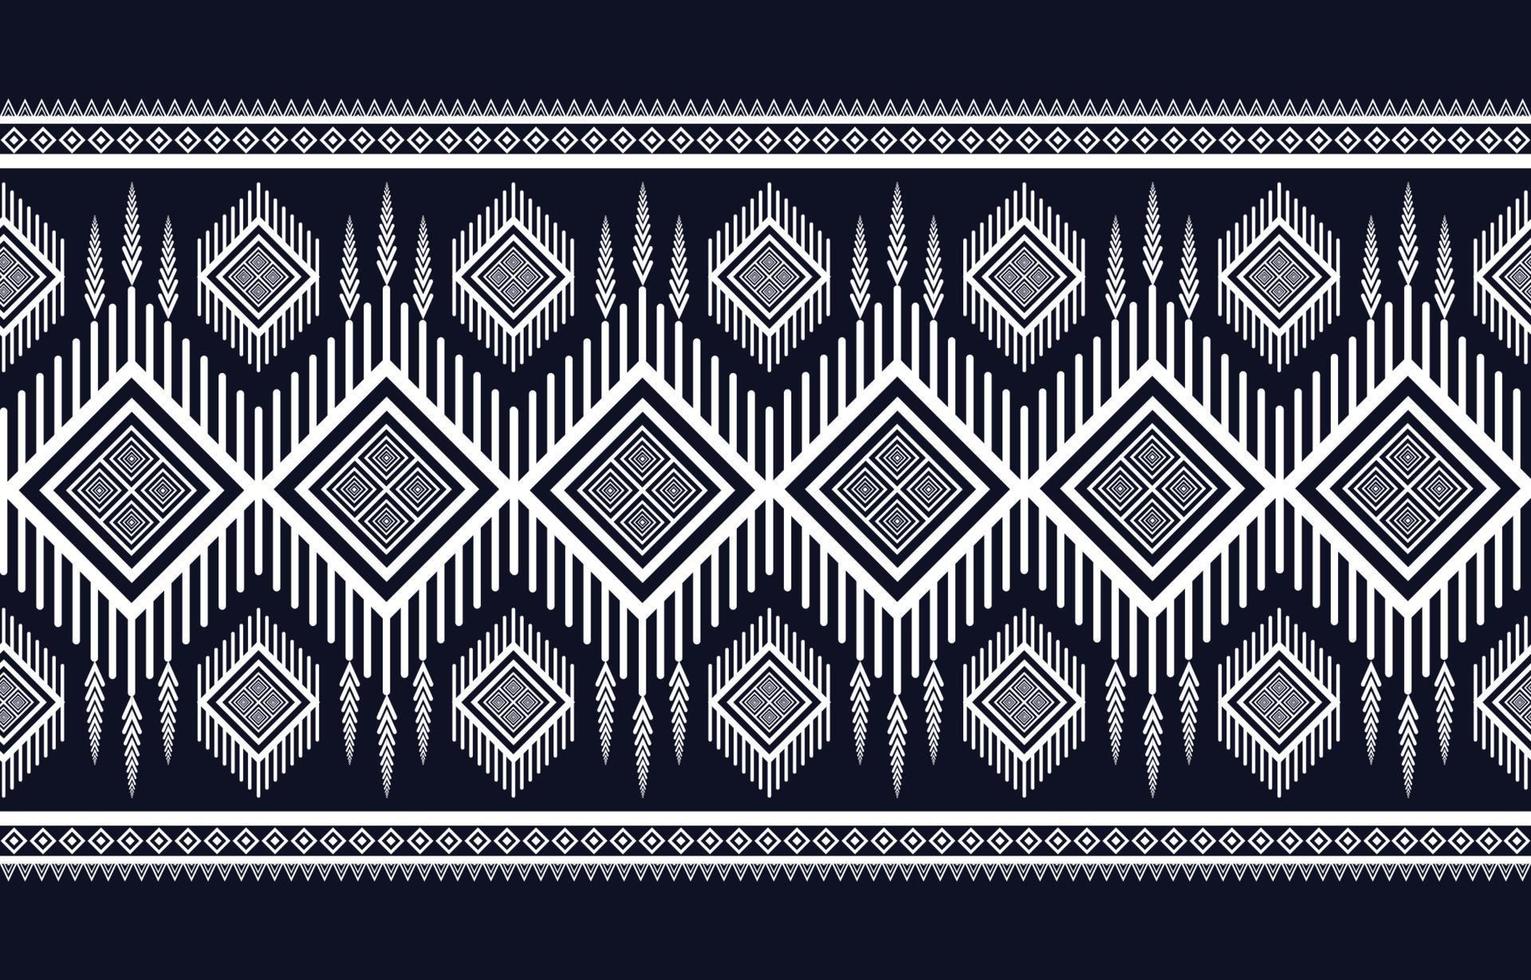 Ethnic abstract geometric pattern Designs for backgrounds or wallpapers, carpets, batik, native patterns. vector illustration